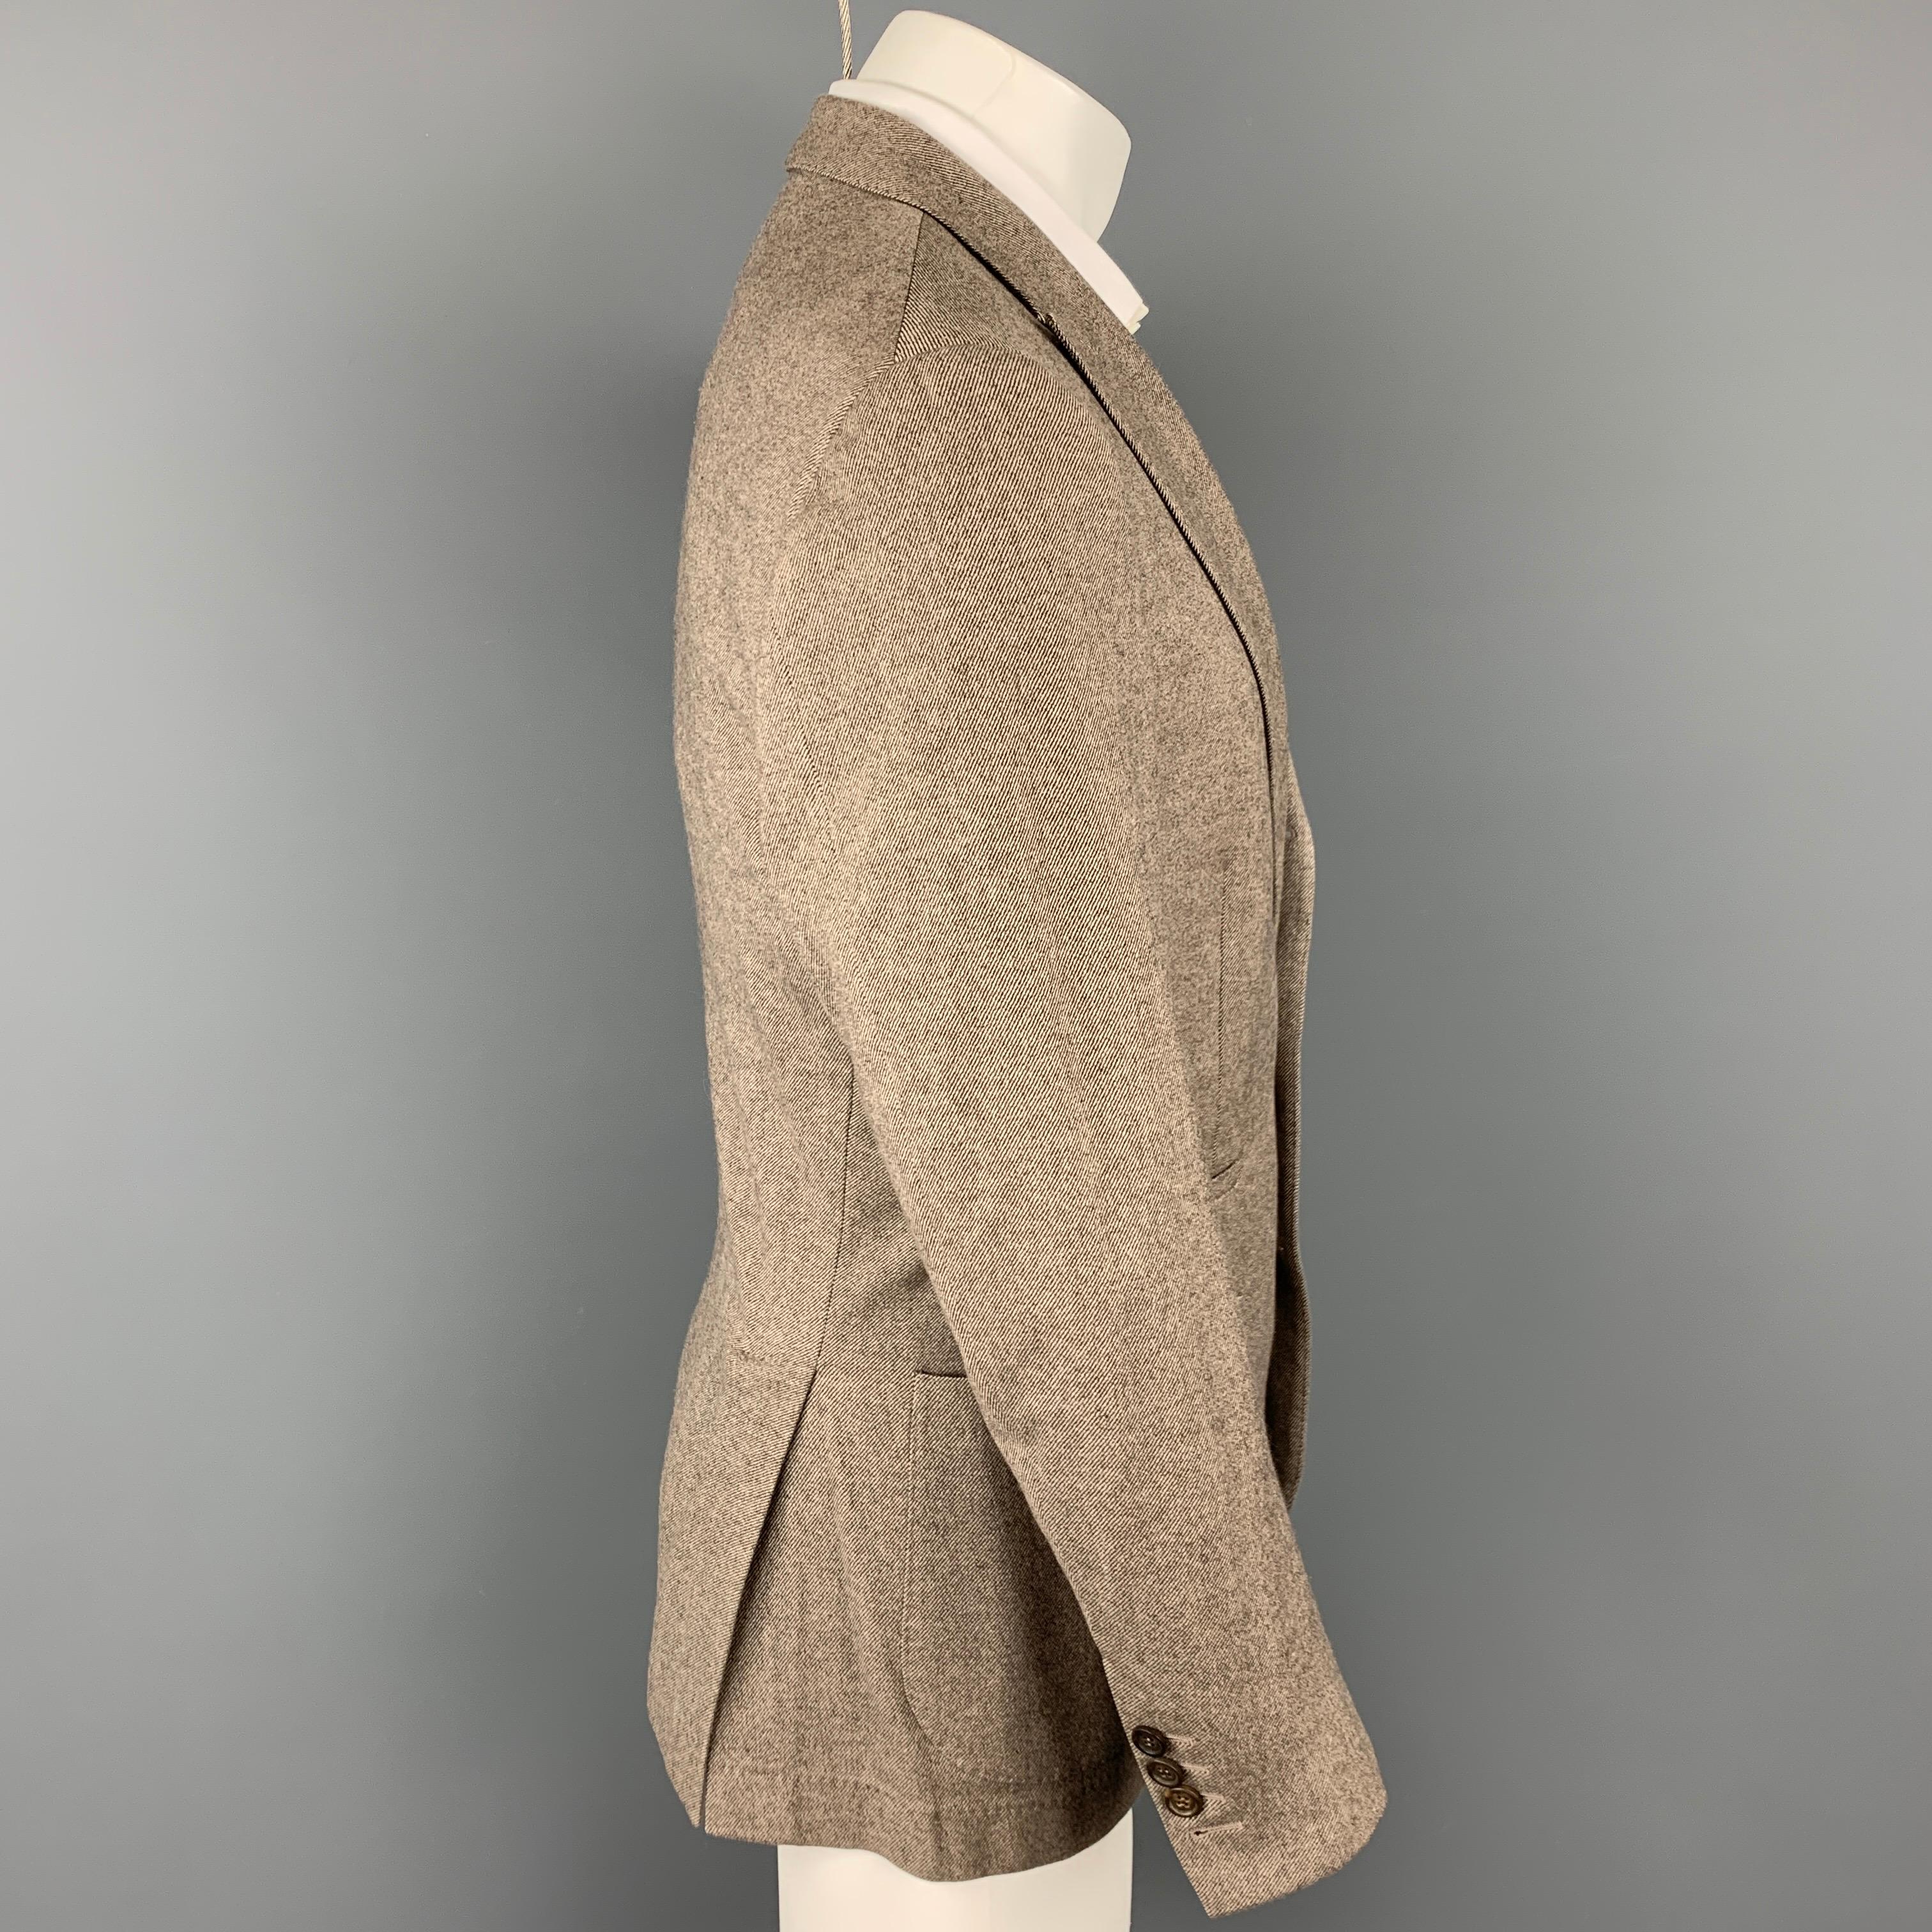 BRUNELLO CUCINELLI sport coat comes in a brown & cream twill material with a half liner featuring a peak lapel, patch pockets, and a three button closure. Comes with garment bag. Made in Italy.

Very Good Pre-Owned Condition.
Marked: